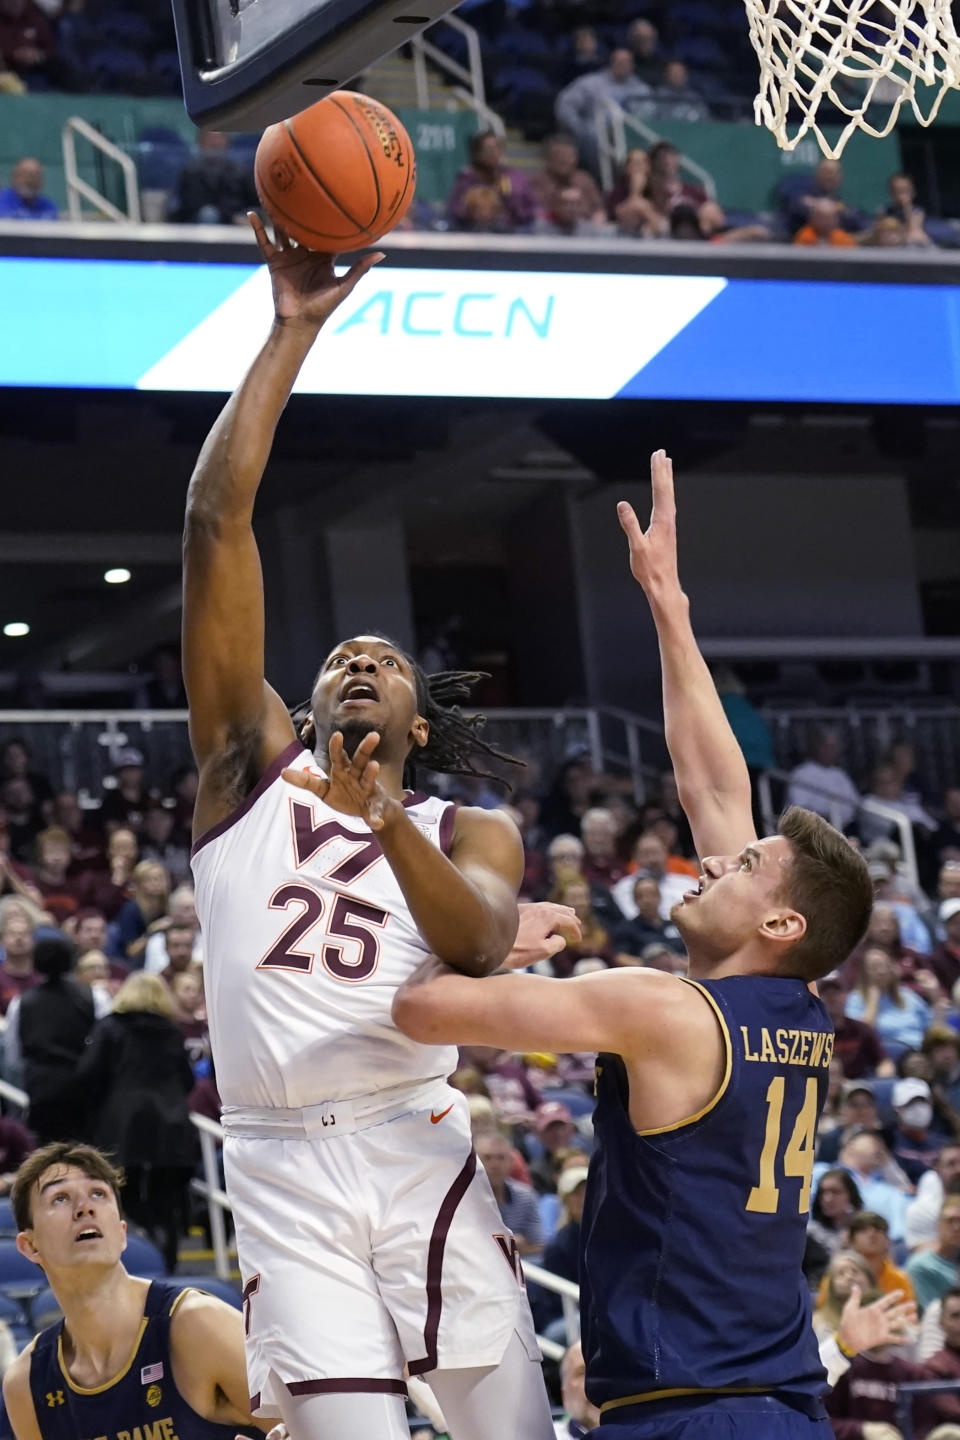 Virginia Tech forward Justyn Mutts (25) shoots next to Notre Dame forward Nate Laszewski (14) during the first half of an NCAA college basketball game at the Atlantic Coast Conference men's tournament in Greensboro, N.C., Tuesday, March 7, 2023. (AP Photo/Chuck Burton)